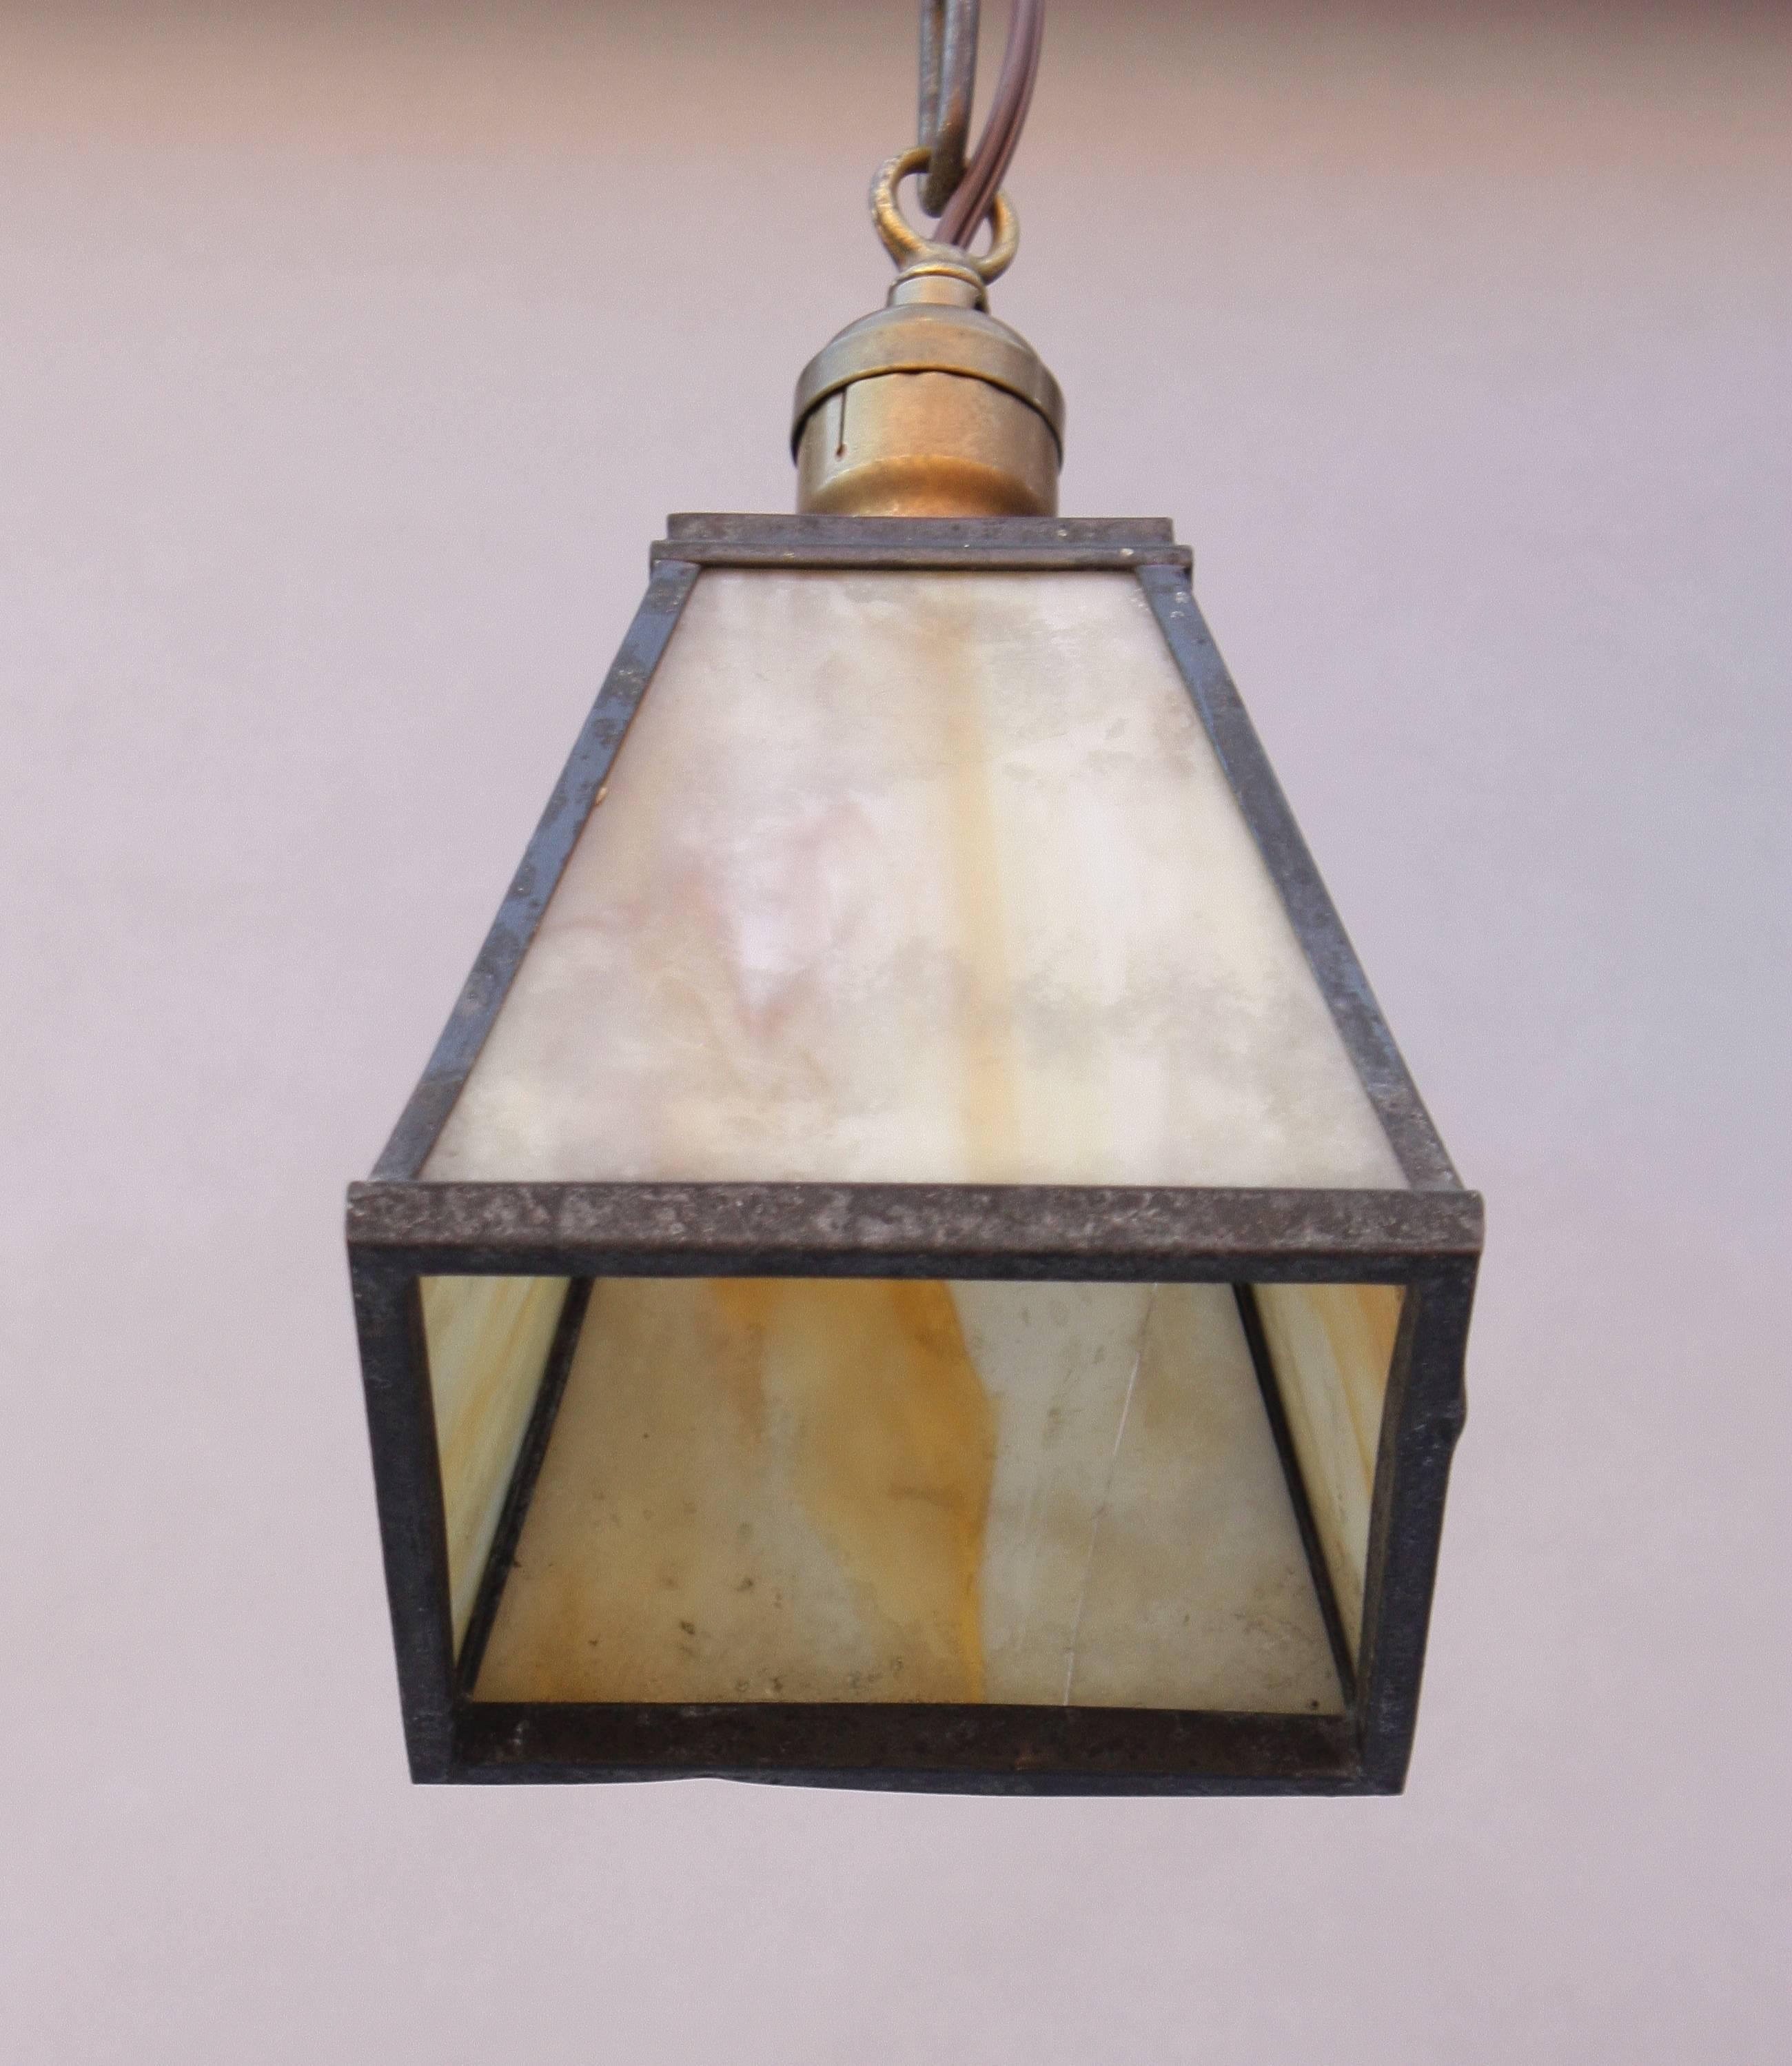 Early 20th century pendant with original slag glass. 

Measures: 8